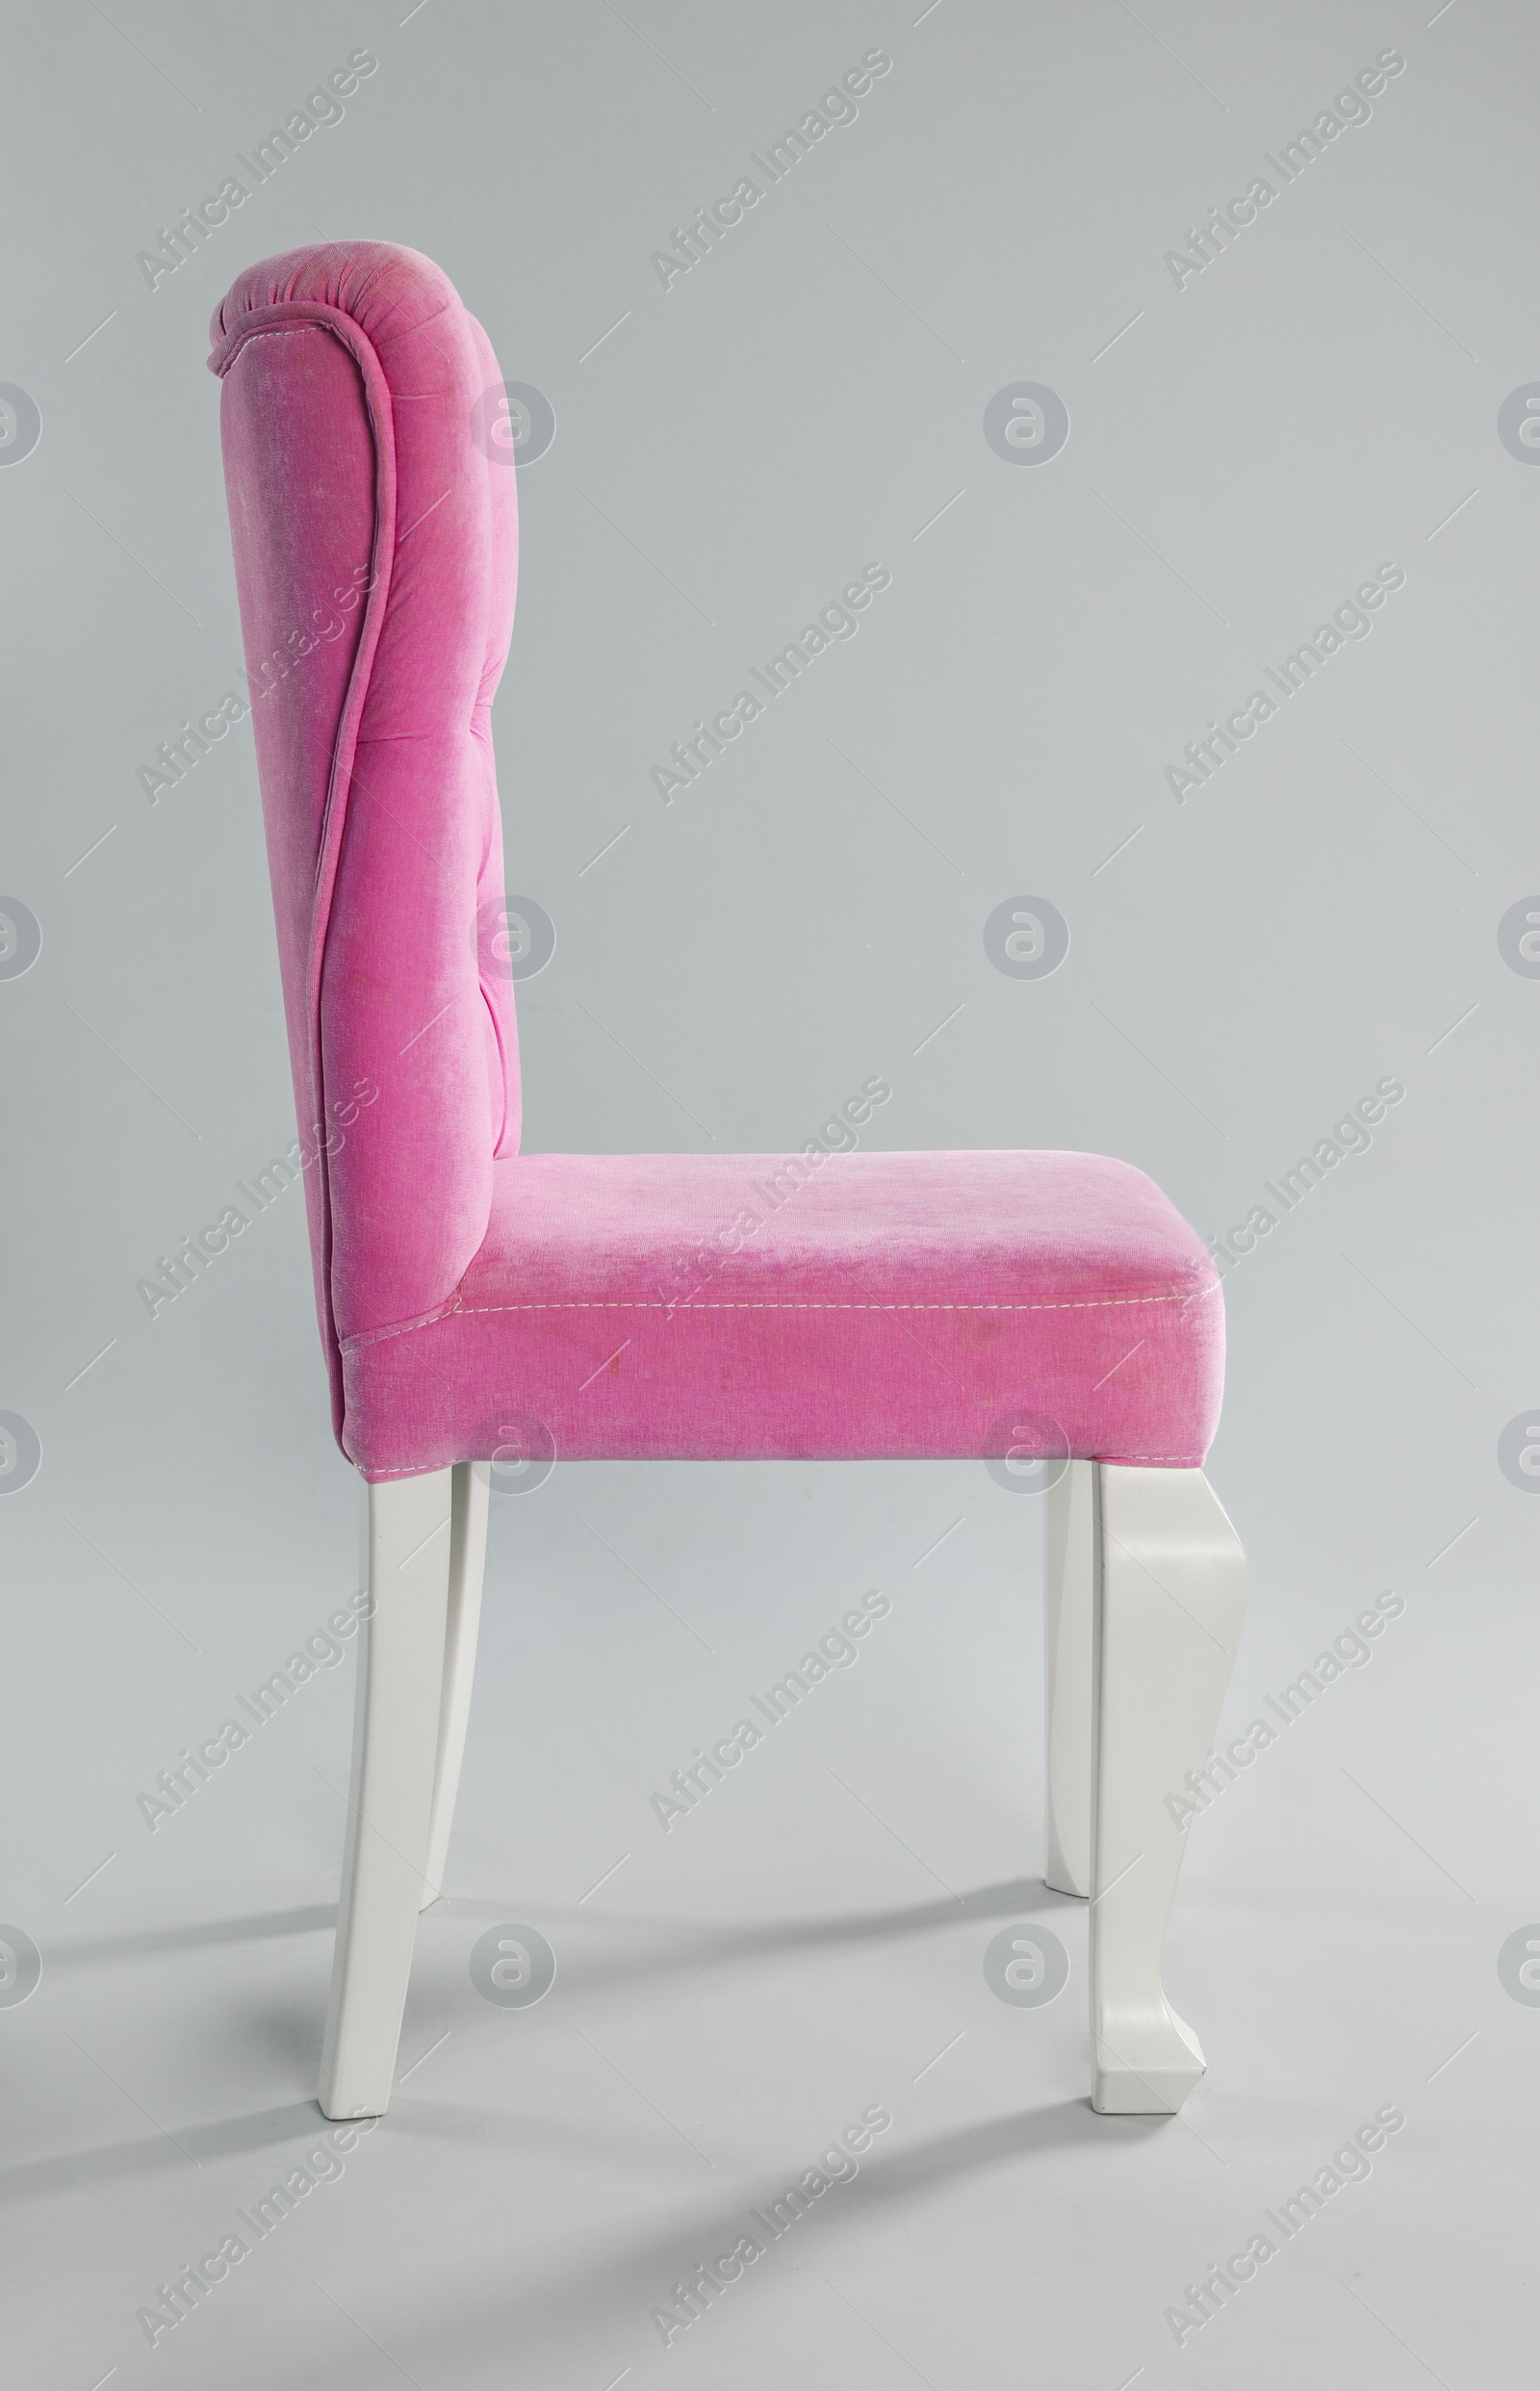 Photo of Stylish pink chair on light grey background. Element of interior design